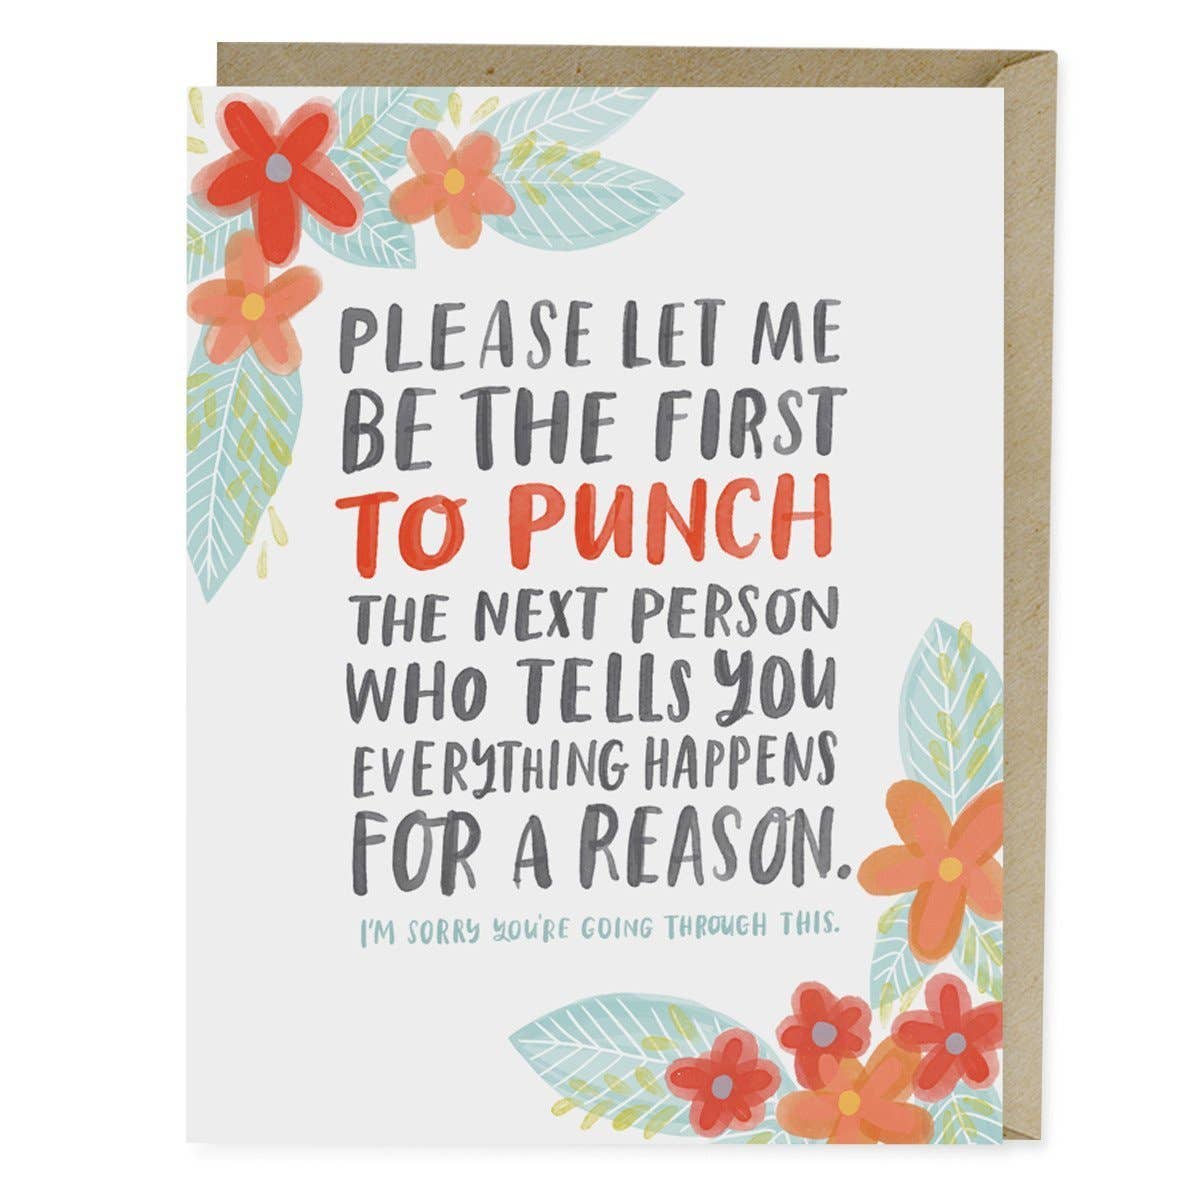 Emily McDowell & Friends • Everything Happens for a Reason Empathy Card